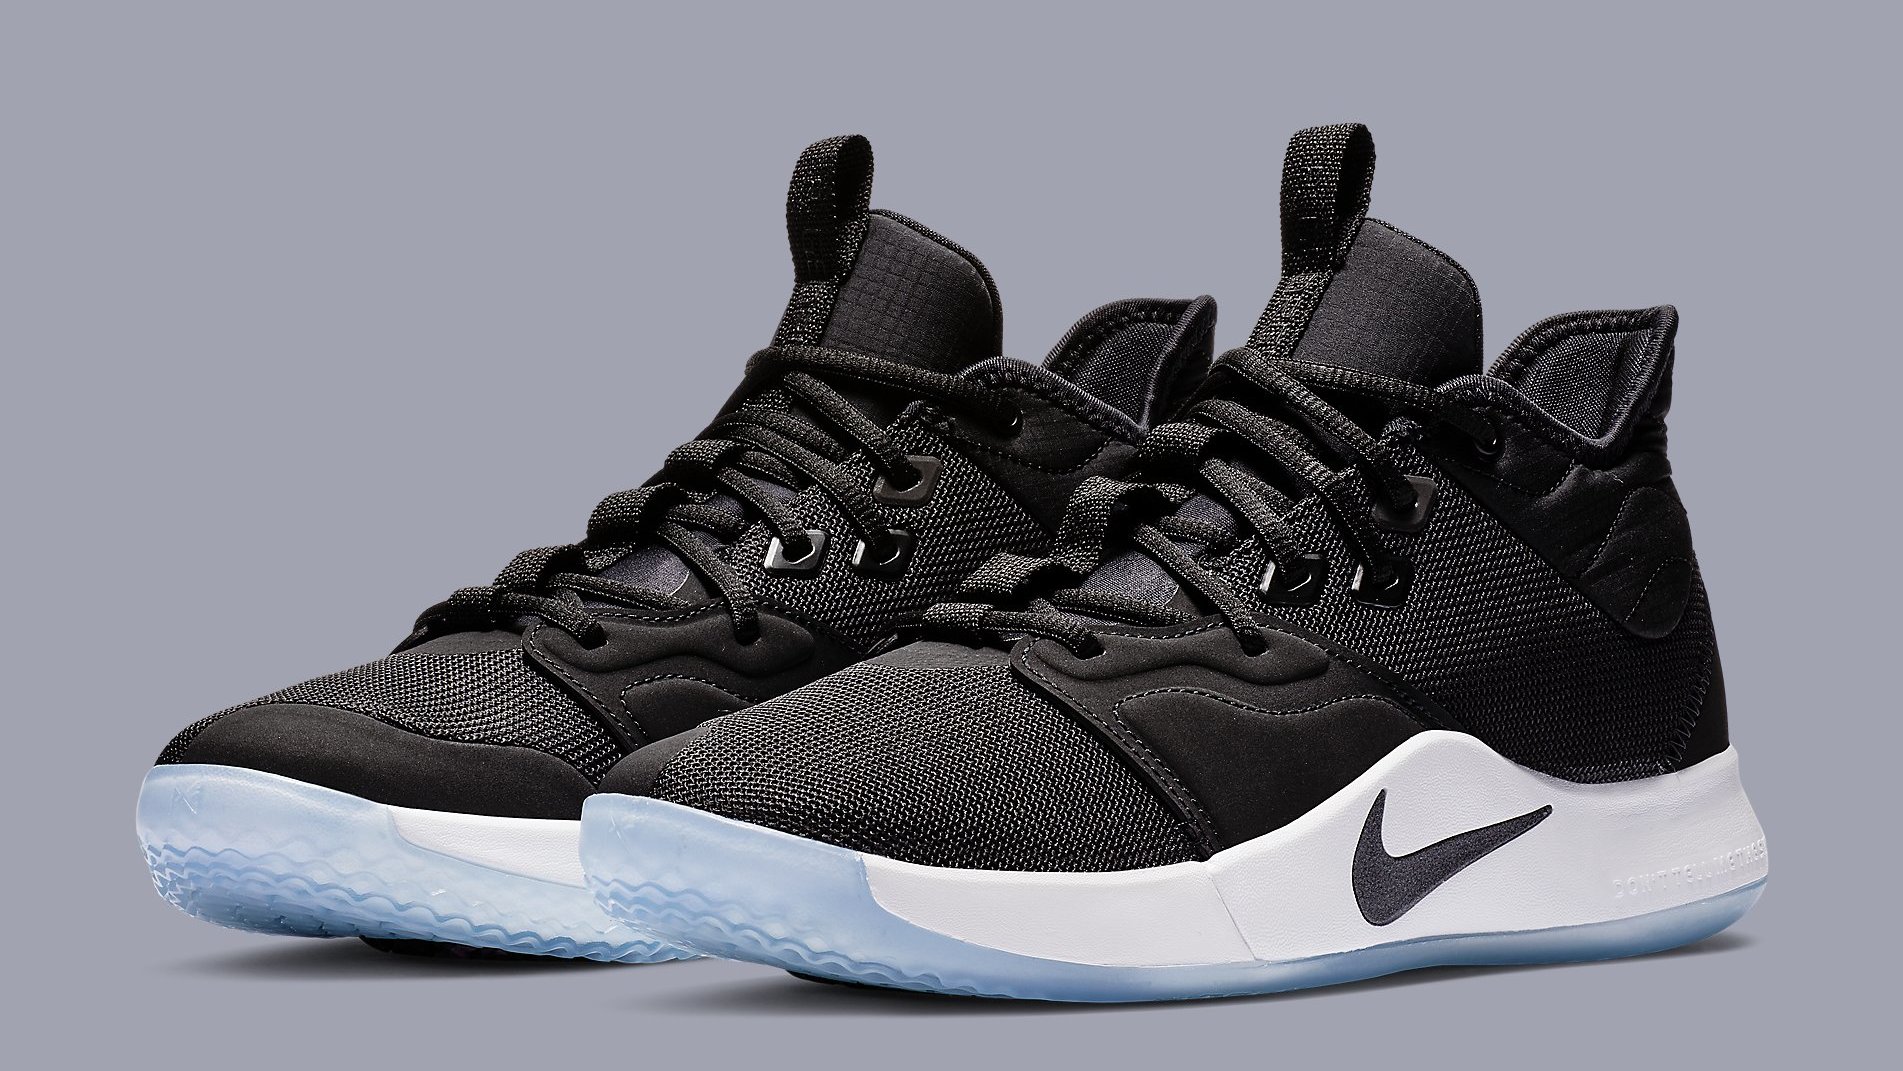 The Nike 3 Is Dropping in Black and White | Complex